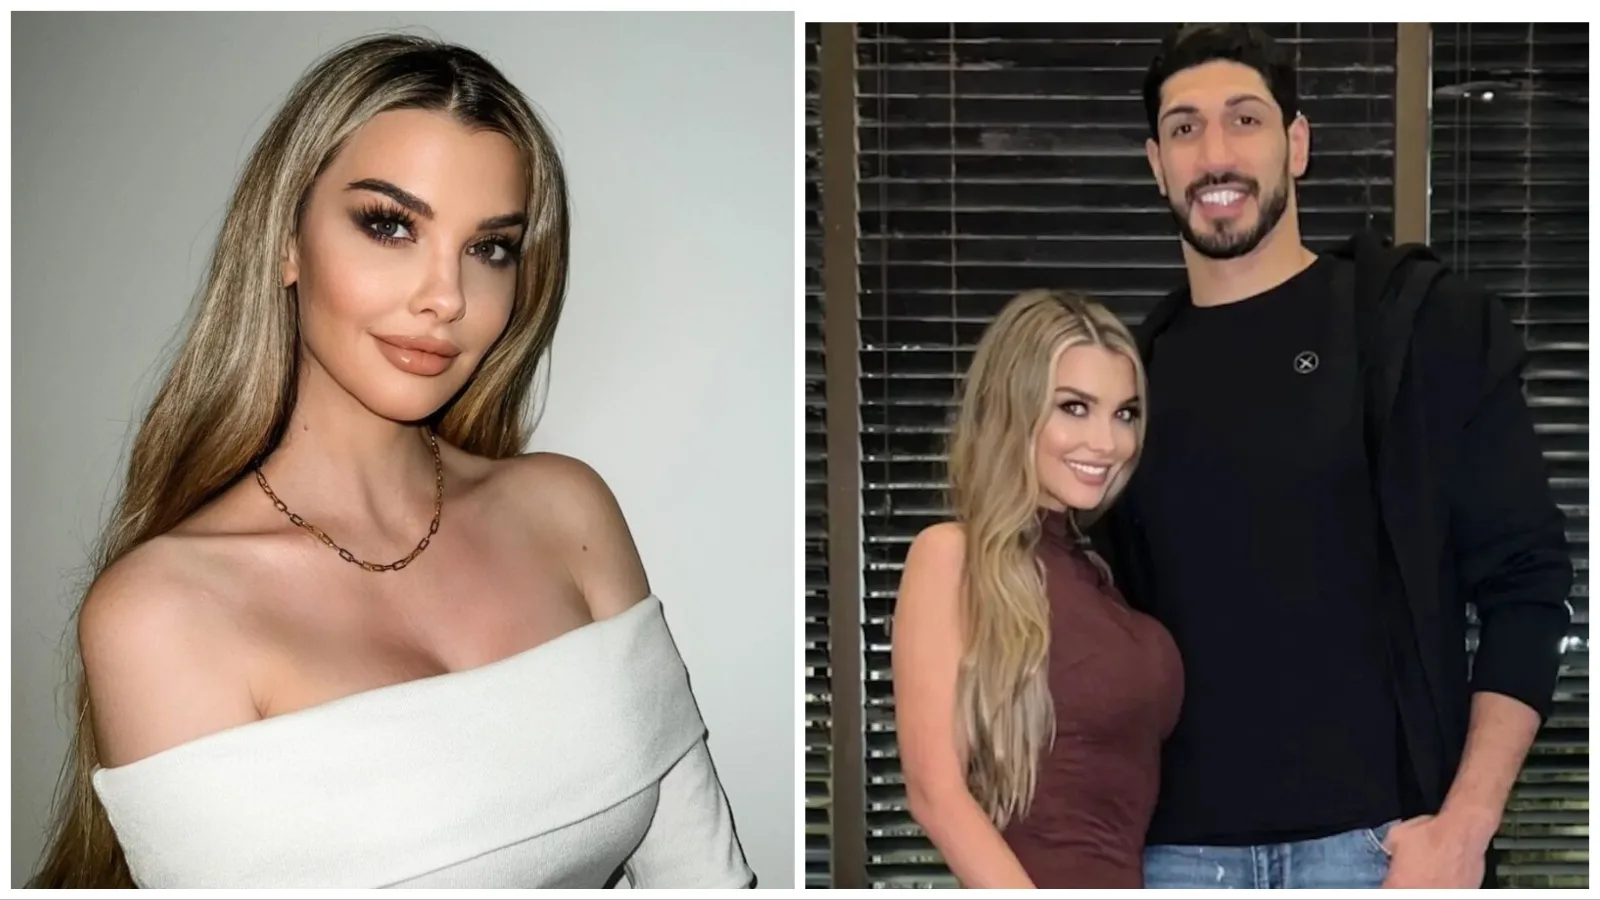 Who is Enes Kanter Wife? Know all about Emily Sears